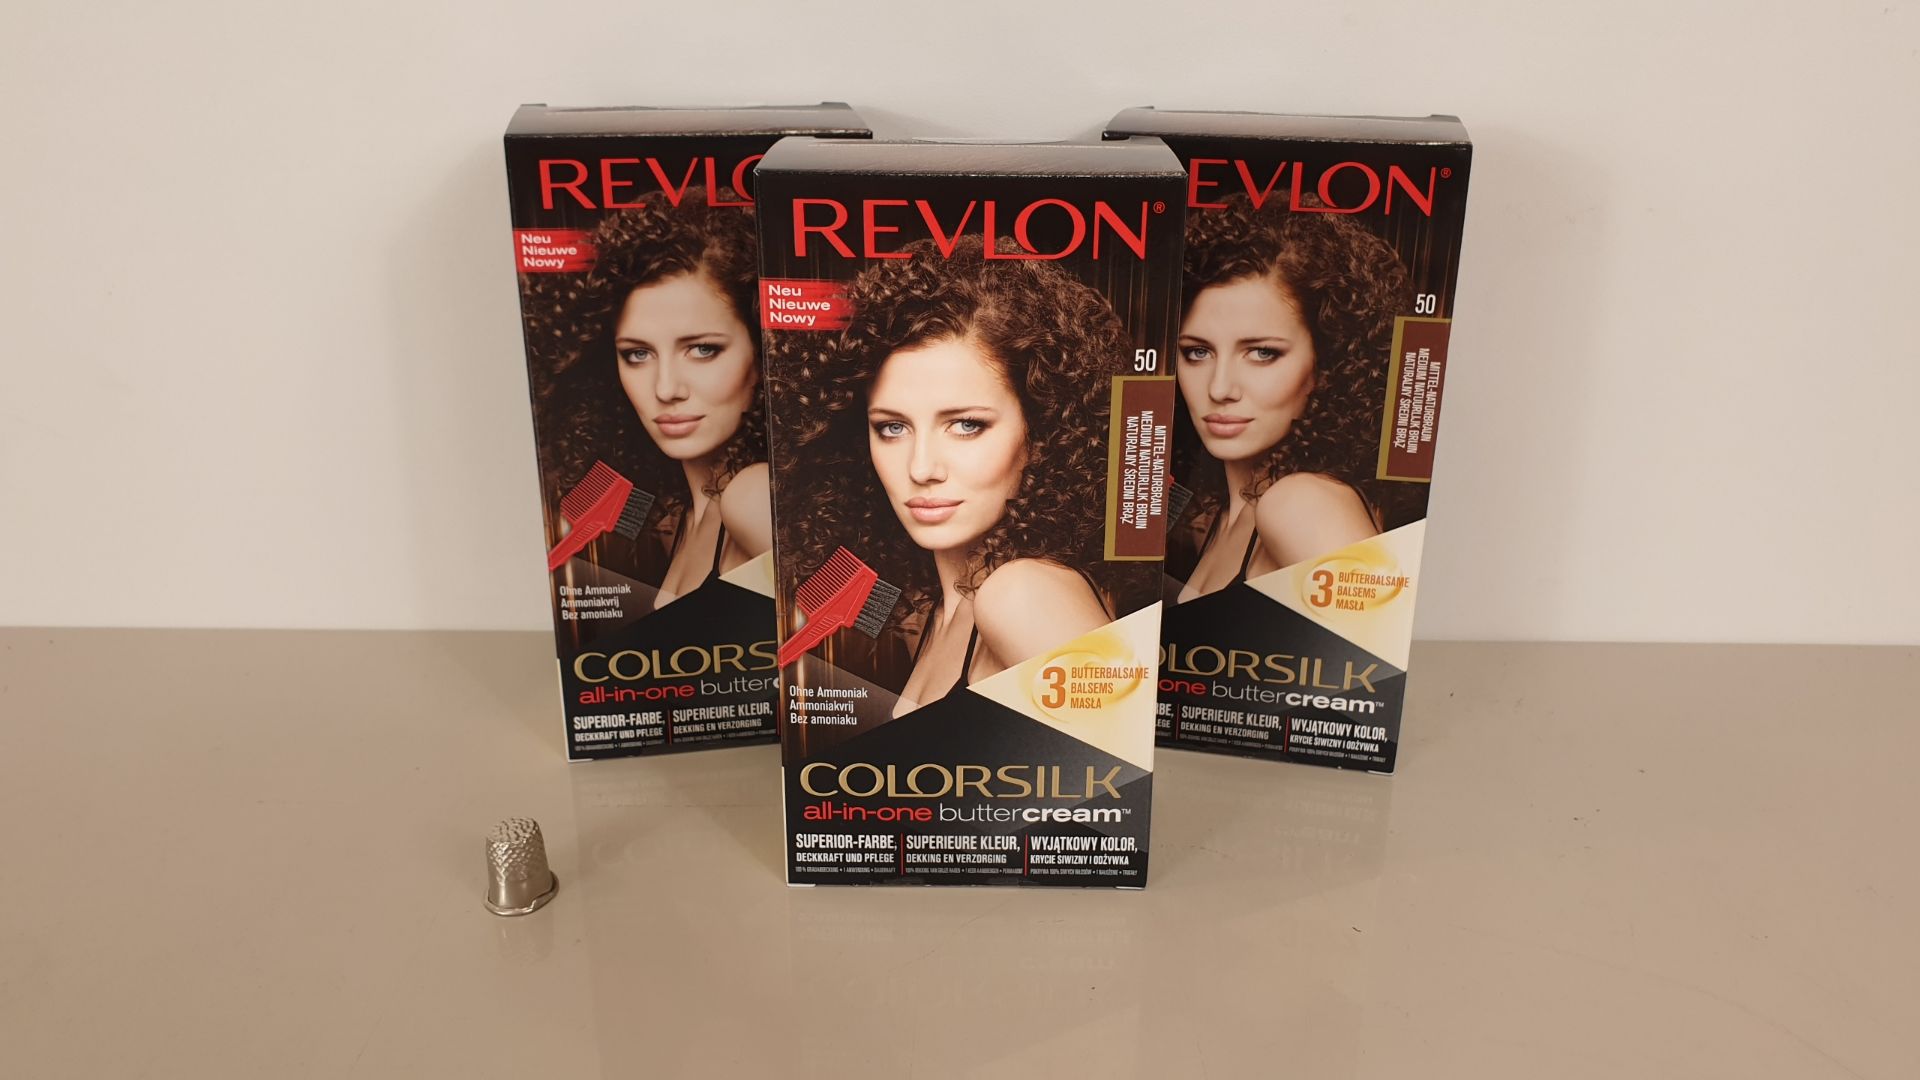 48 X BRAND NEW BOXED REVLON ( COLORSILK ALL IN ONE) NATURAL BROWN BUTTERCREAM - IN 4 BOXES